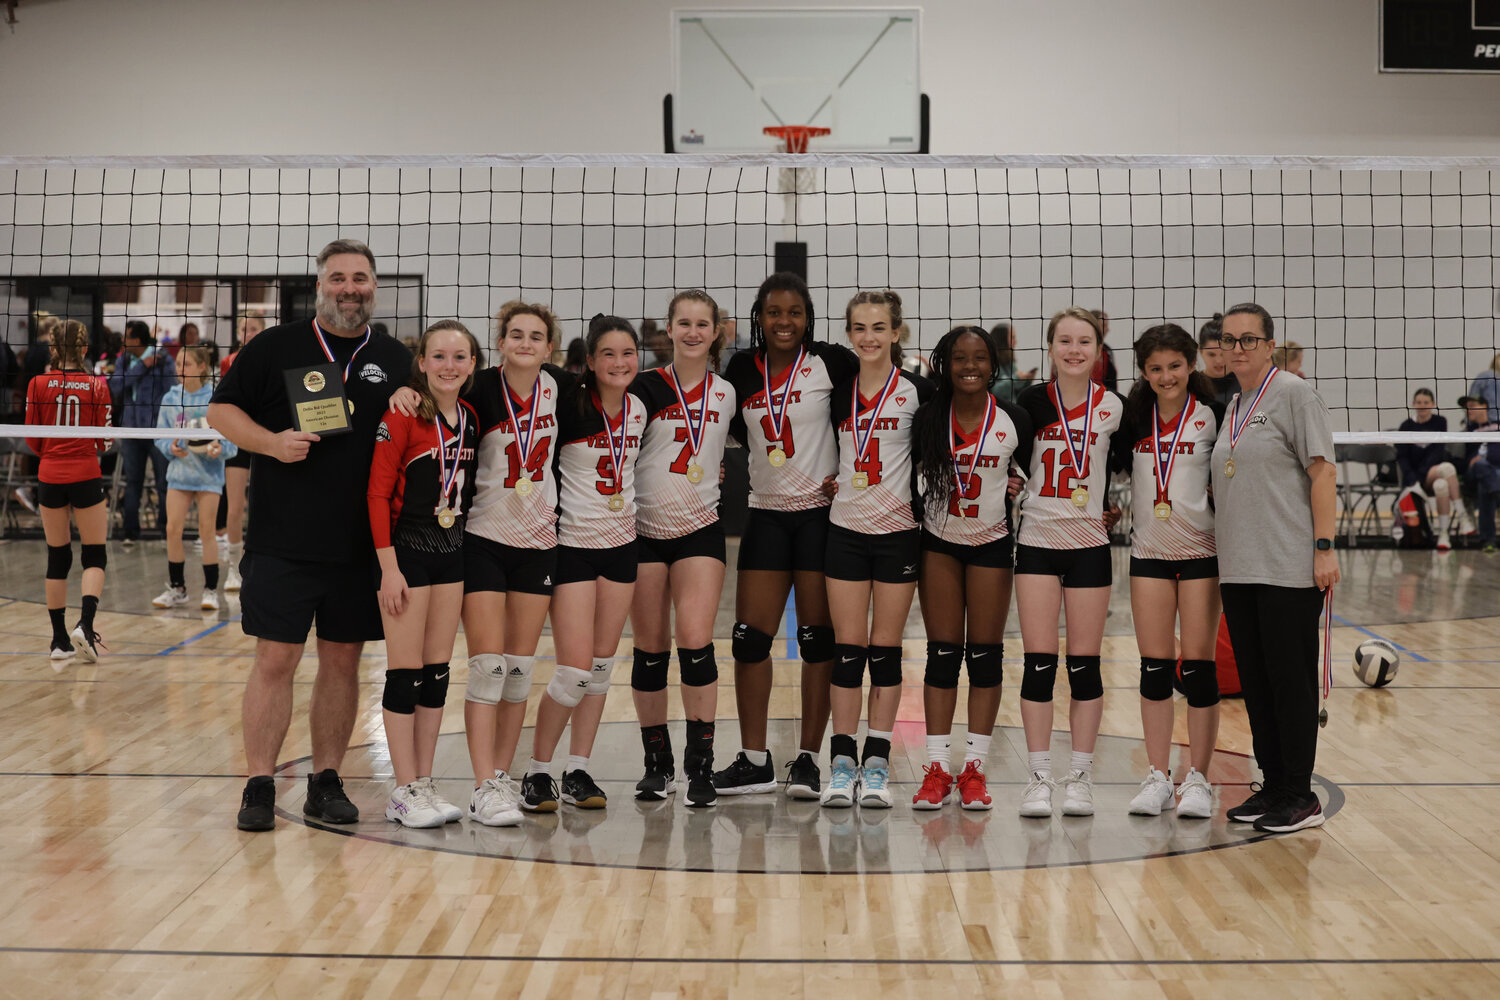 The MS Velocity Volleyball team gathers together after a game. Pictured, from left: Barrett Sharpe, Liza Whitt, Anabelle Sharpe, Catherine Bensler, Laura Catherine Freeman, Asia Lindsay, Gabi Strickland, Makenzie Taylor, Macy Gladden, Kylie Young, and Rita Sharpe.